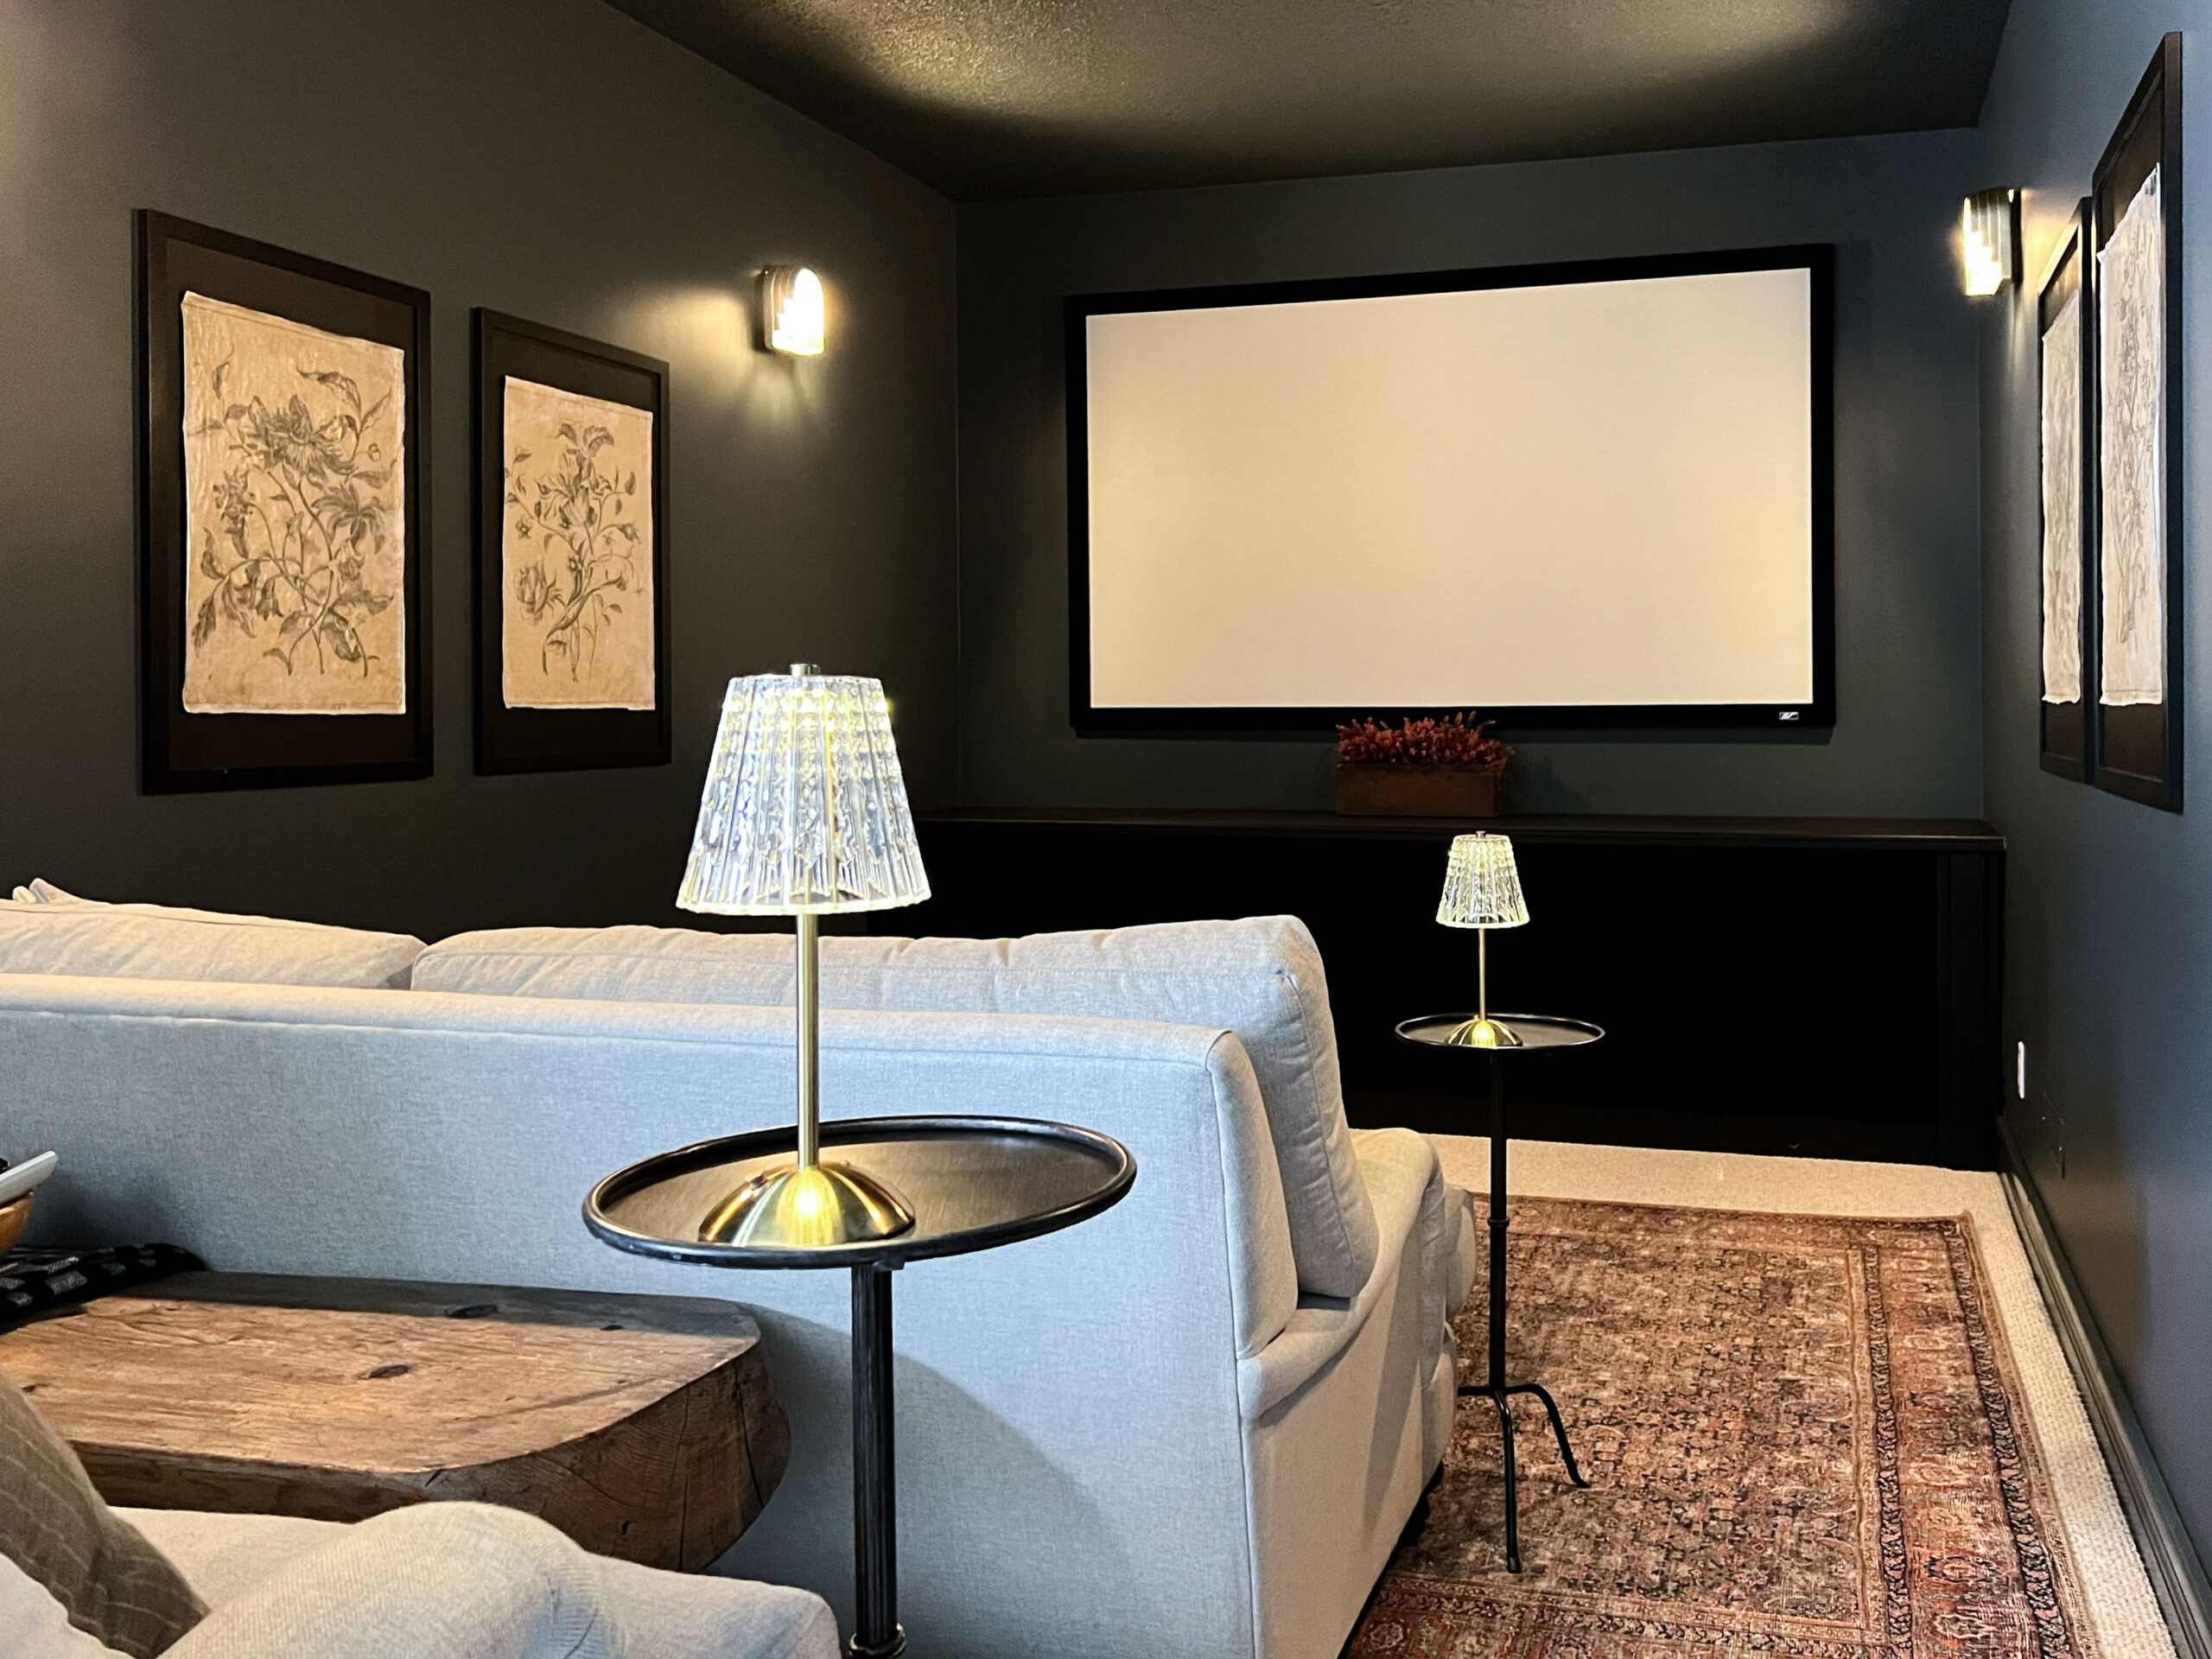 Media room looking at the screen with cordless lamps, moody walls and a vintage stye rug